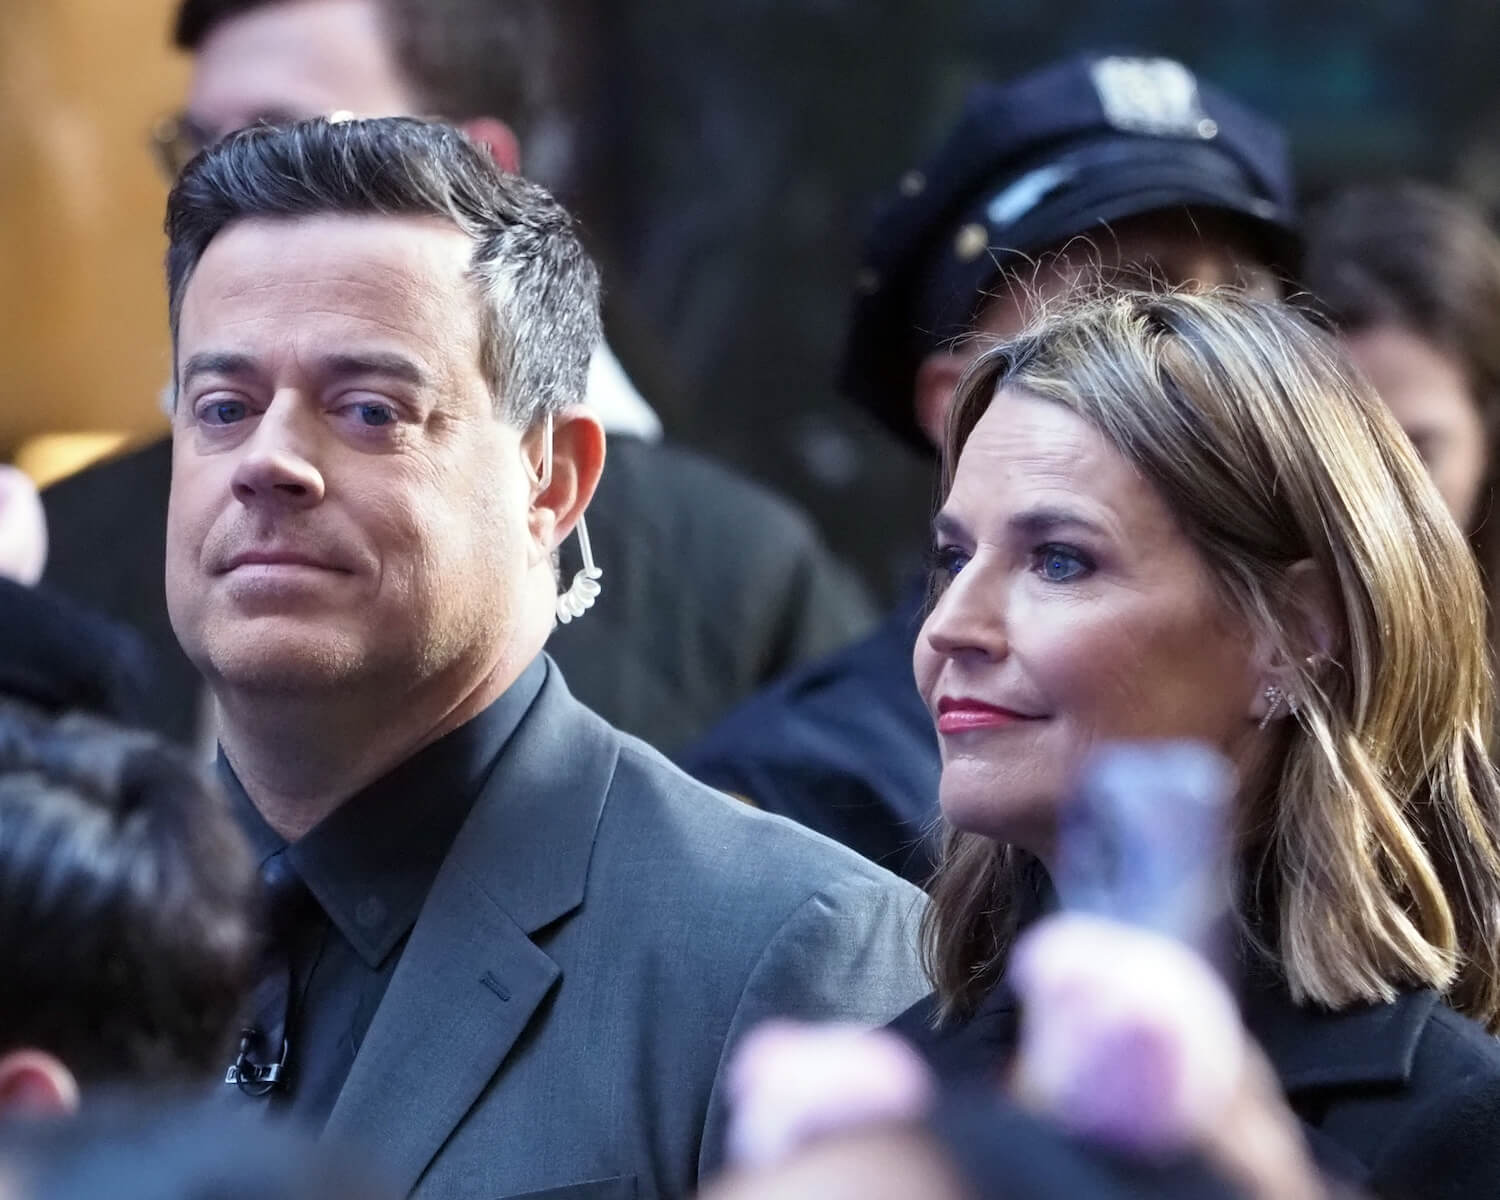 'Today' co-host Carson Daly outdoors next to Savannah Guthrie